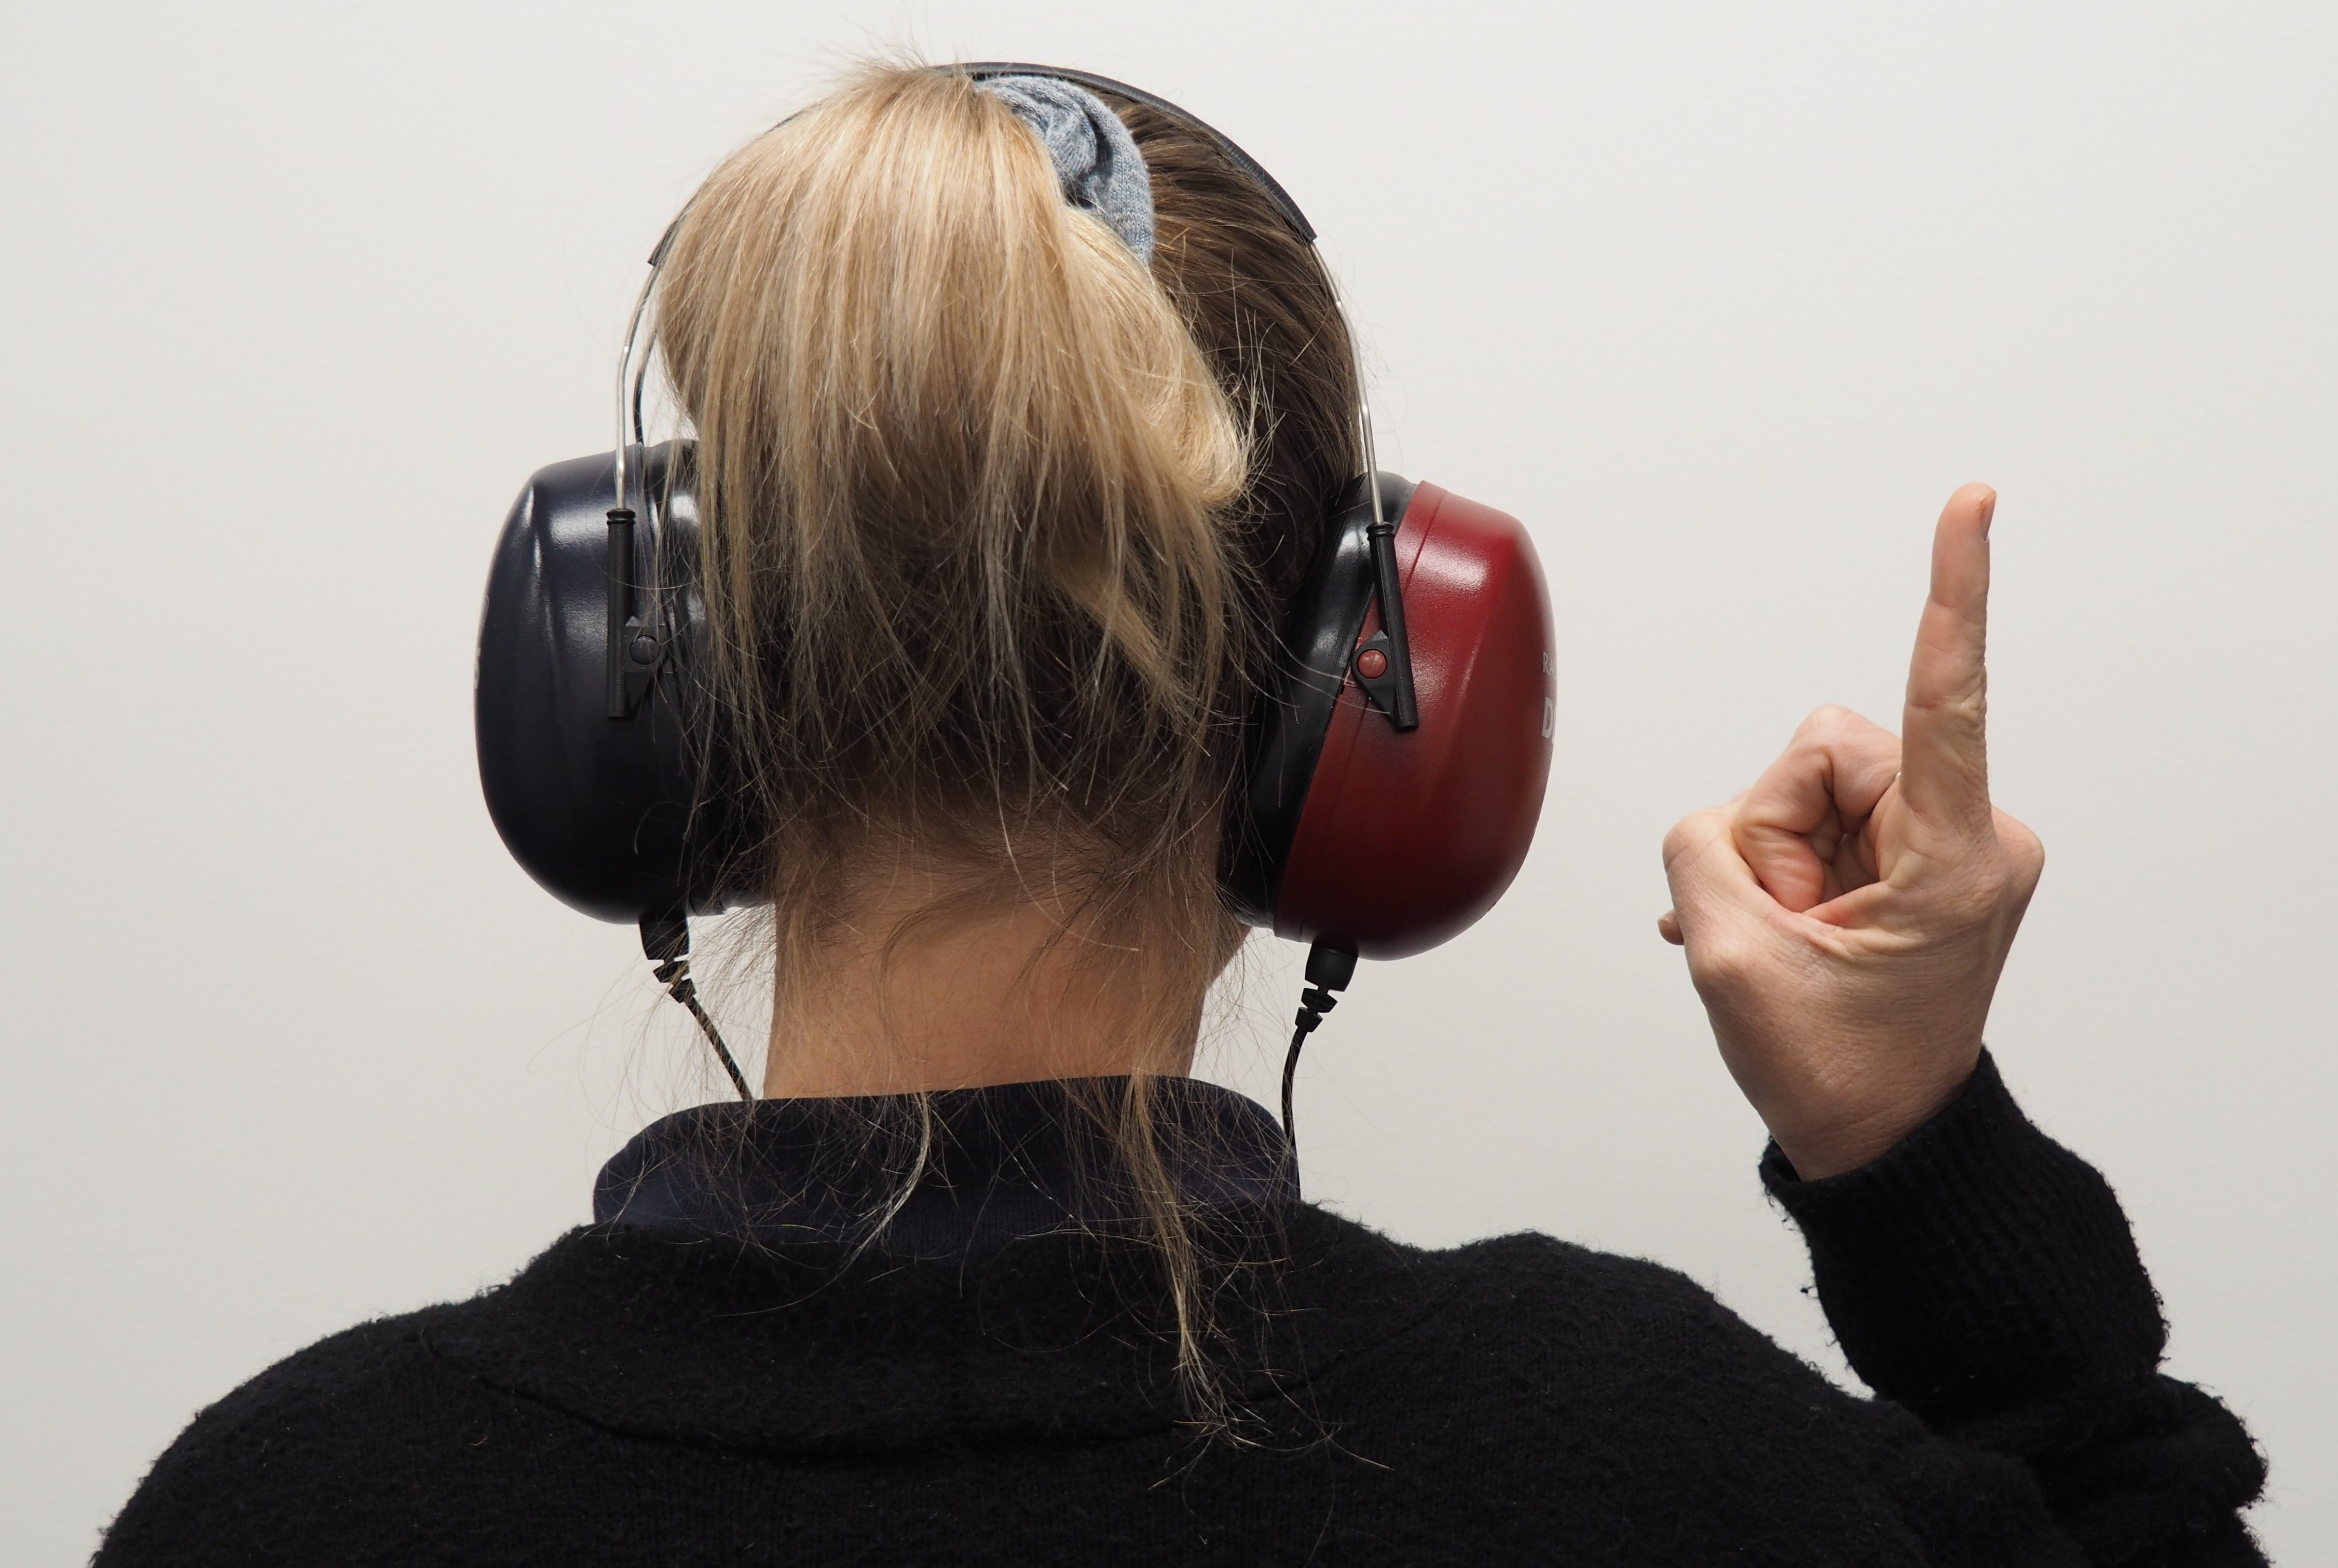 a woman wearing headphones raises one finger while taking a hearing test